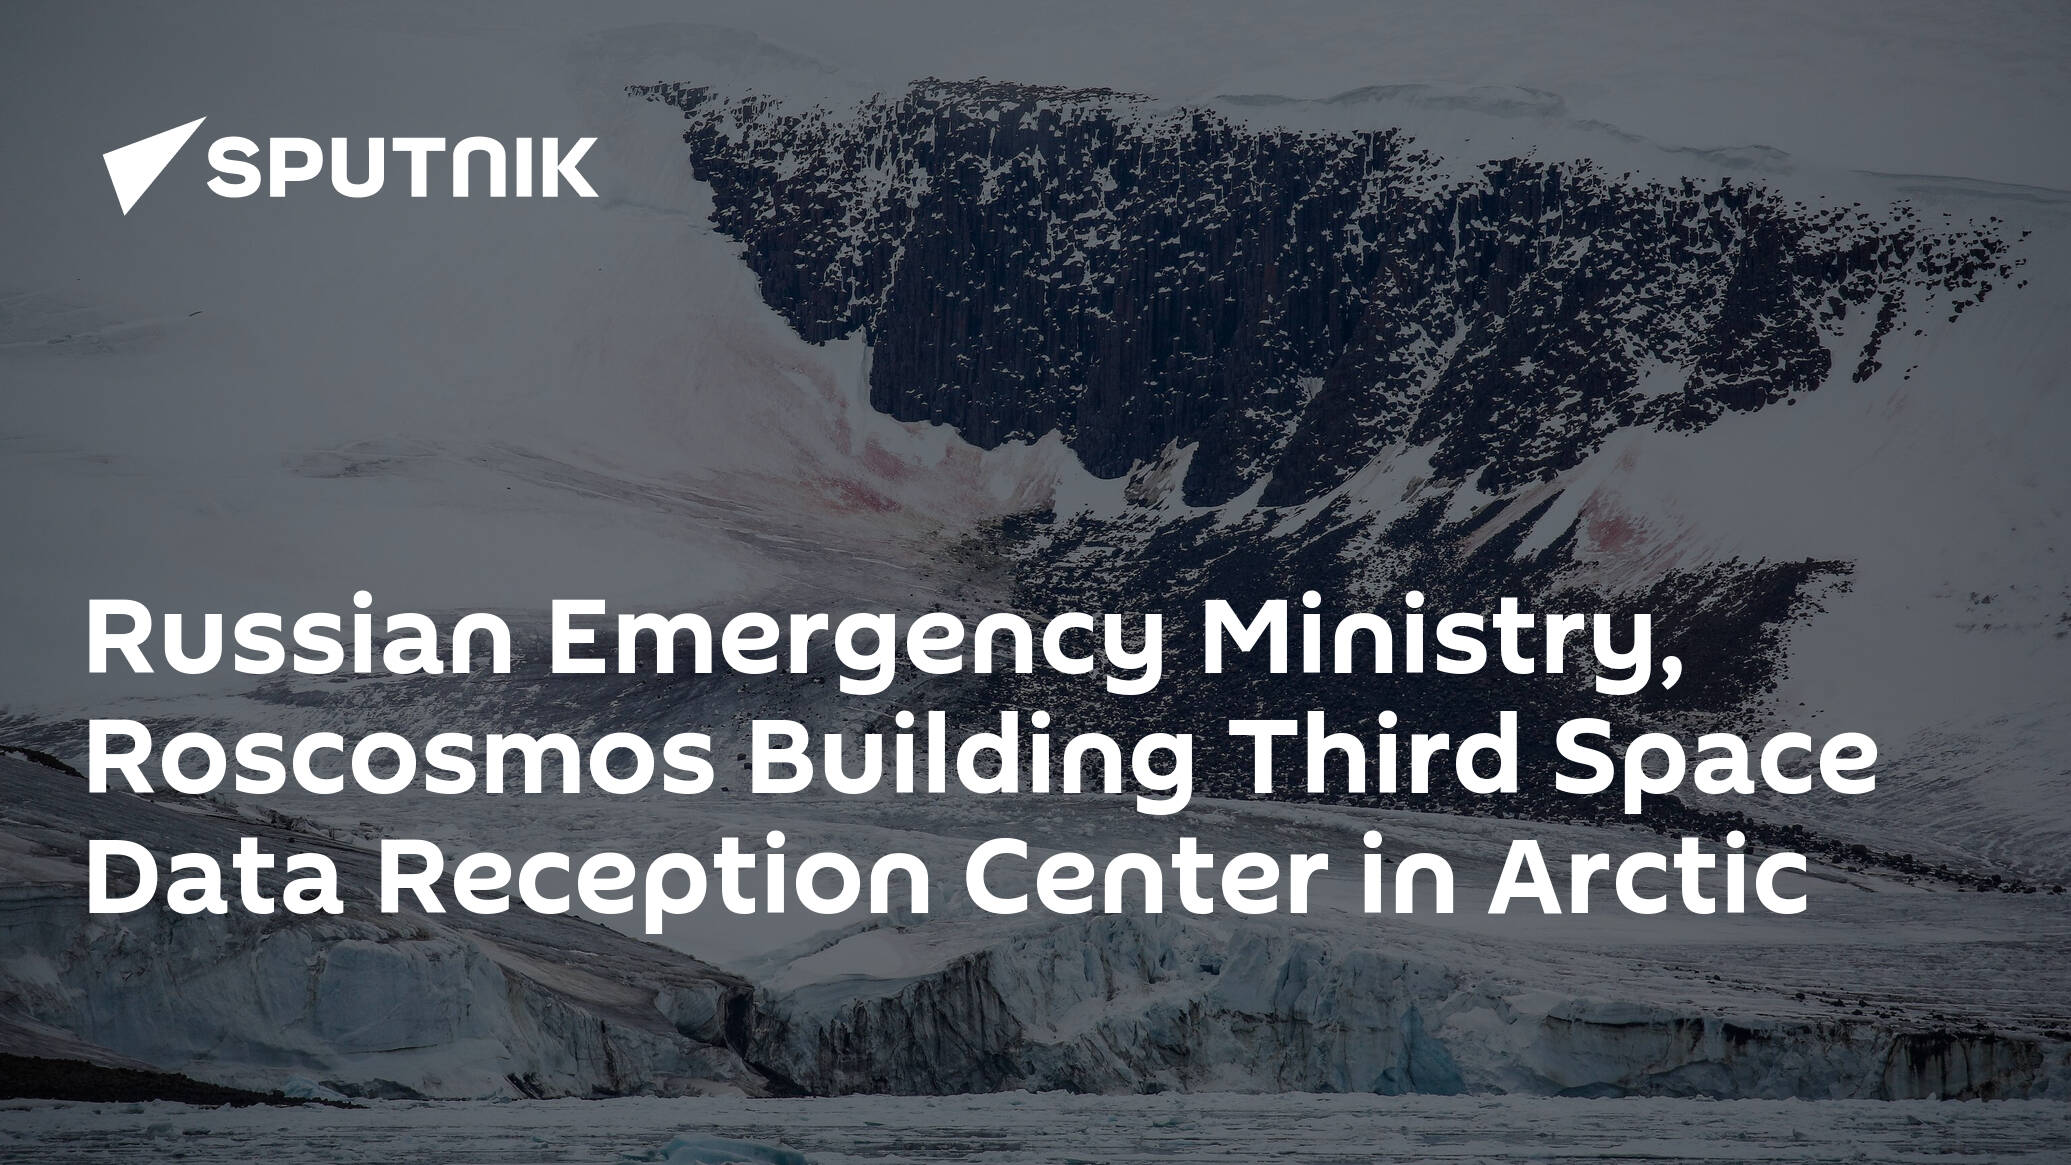 Russian Emergency Ministry, Roscosmos Building Third Space Data Reception Center in Arctic